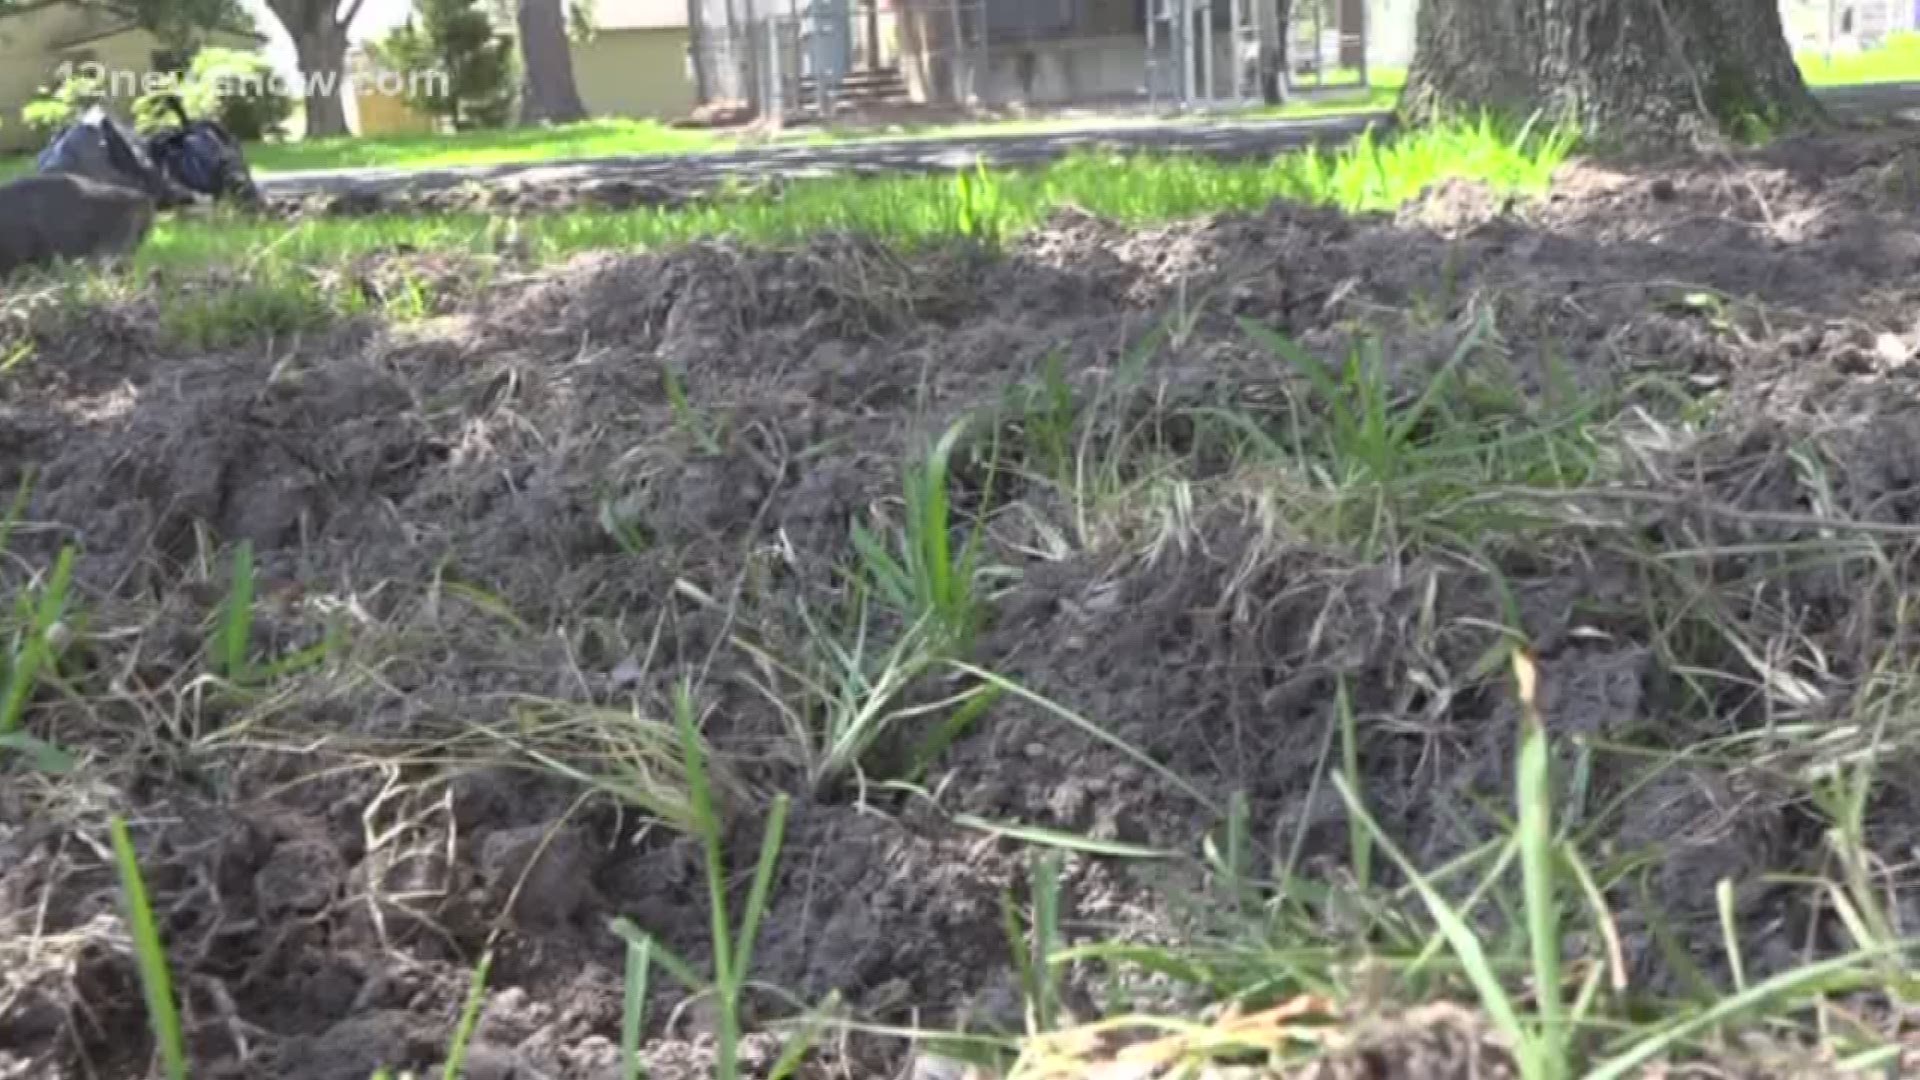 A man from Port Neches is frustrated that feral hogs are tearing up his front lawn.